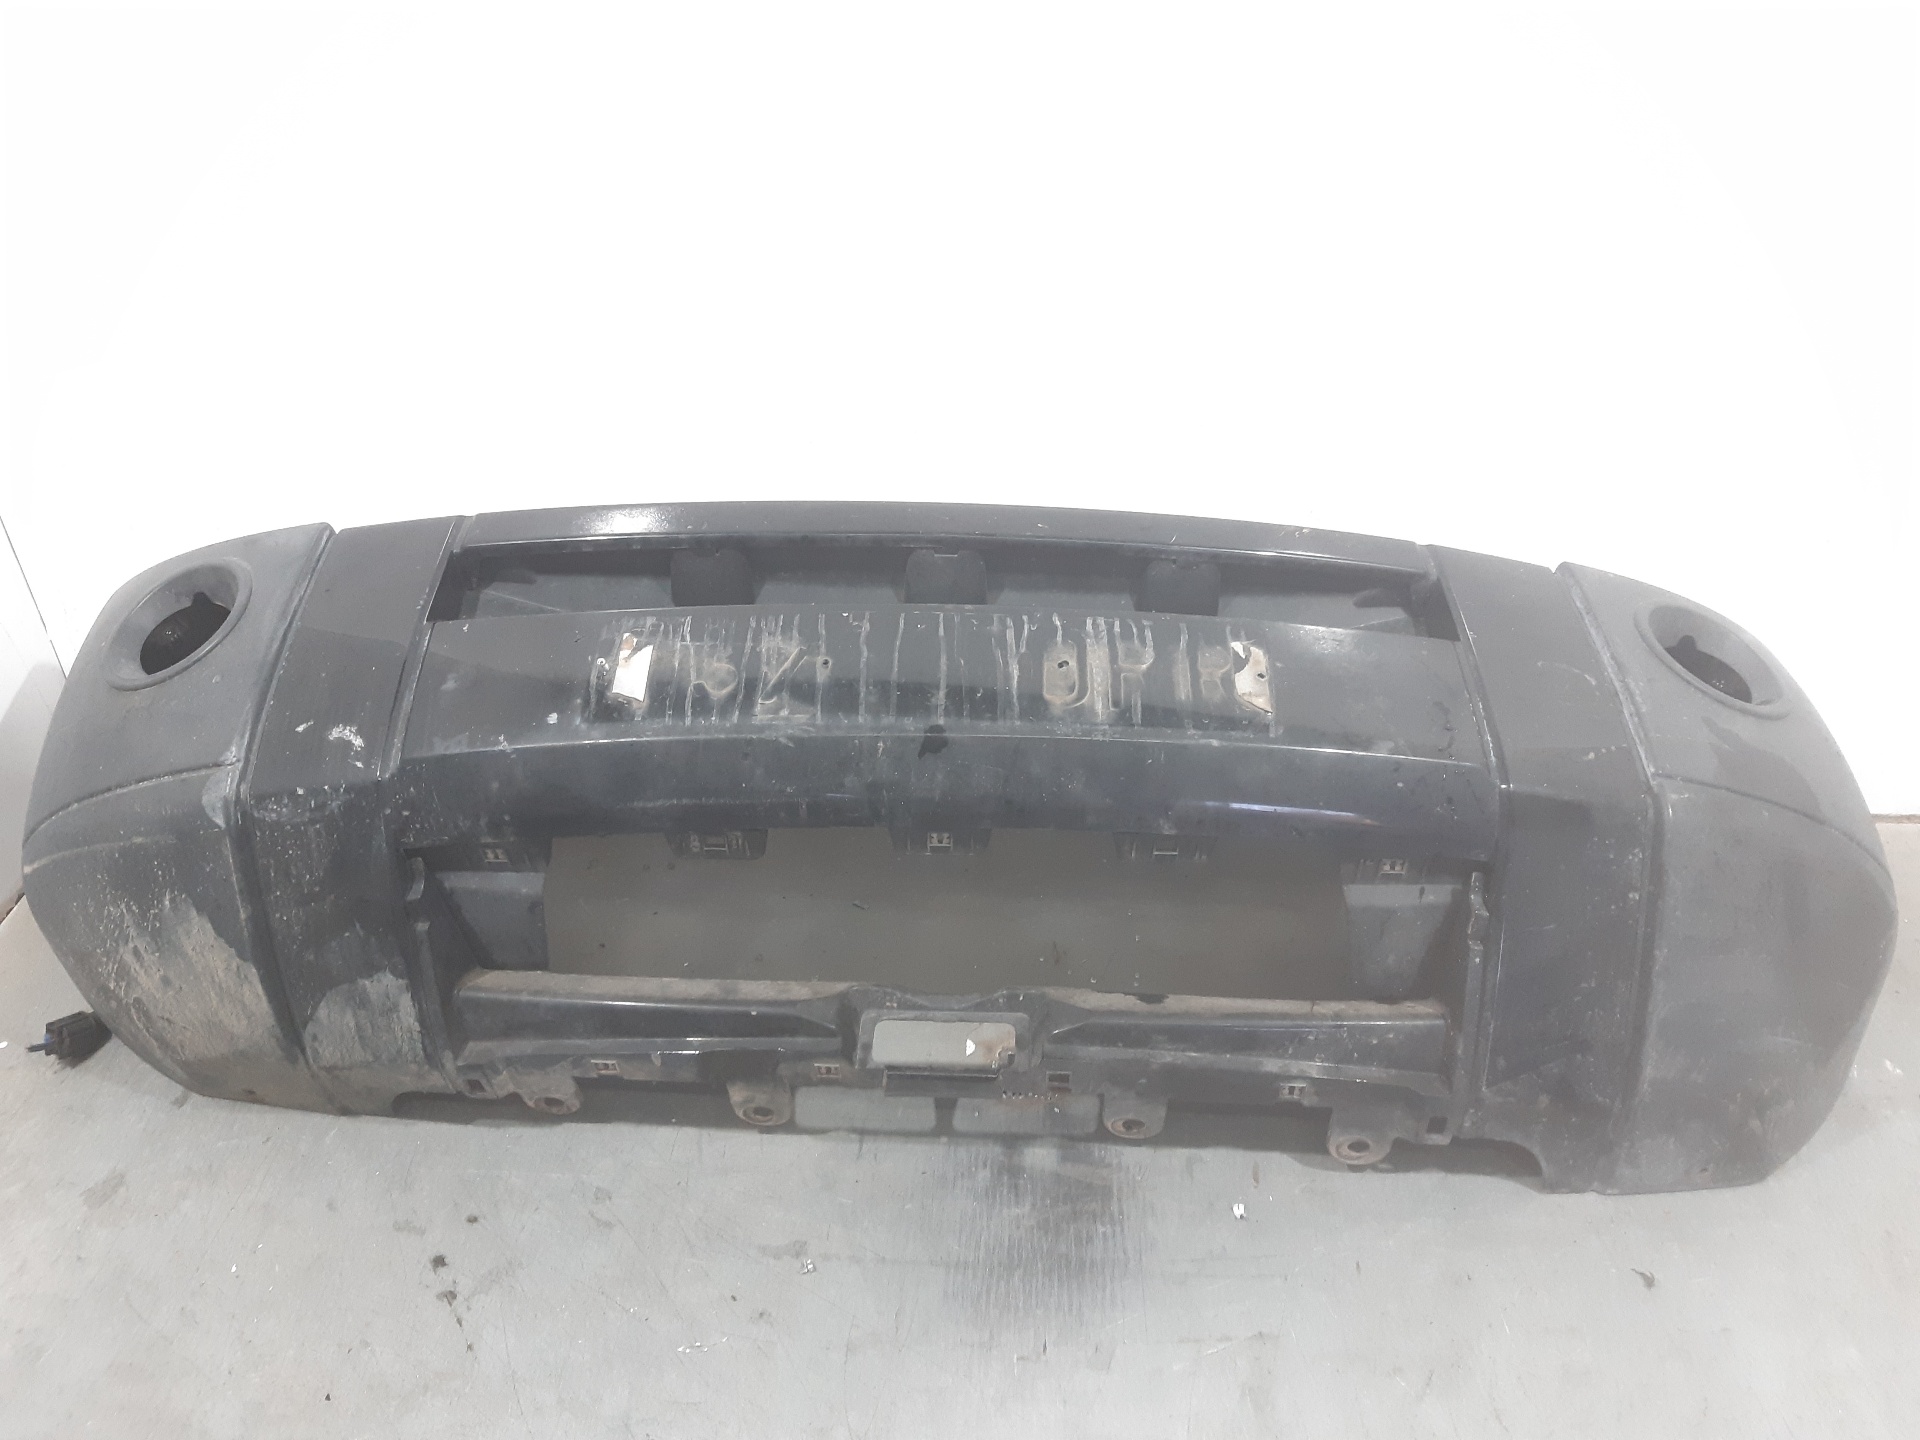 LAND ROVER Discovery 4 generation (2009-2016) Front Bumper DPB500055LML 18750318